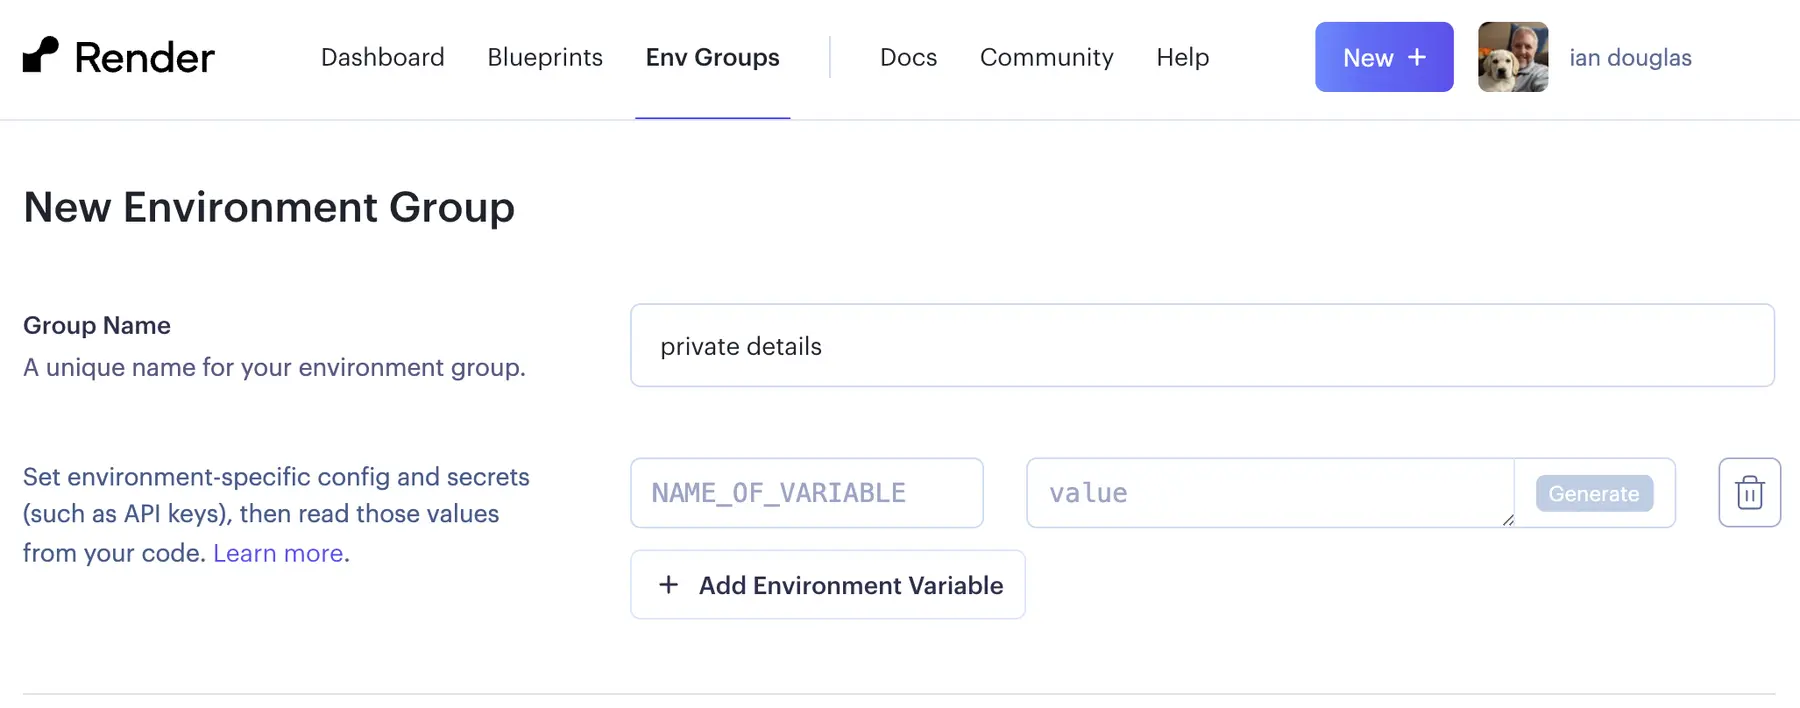 Screenshot showing how an environment group can be given a custom name